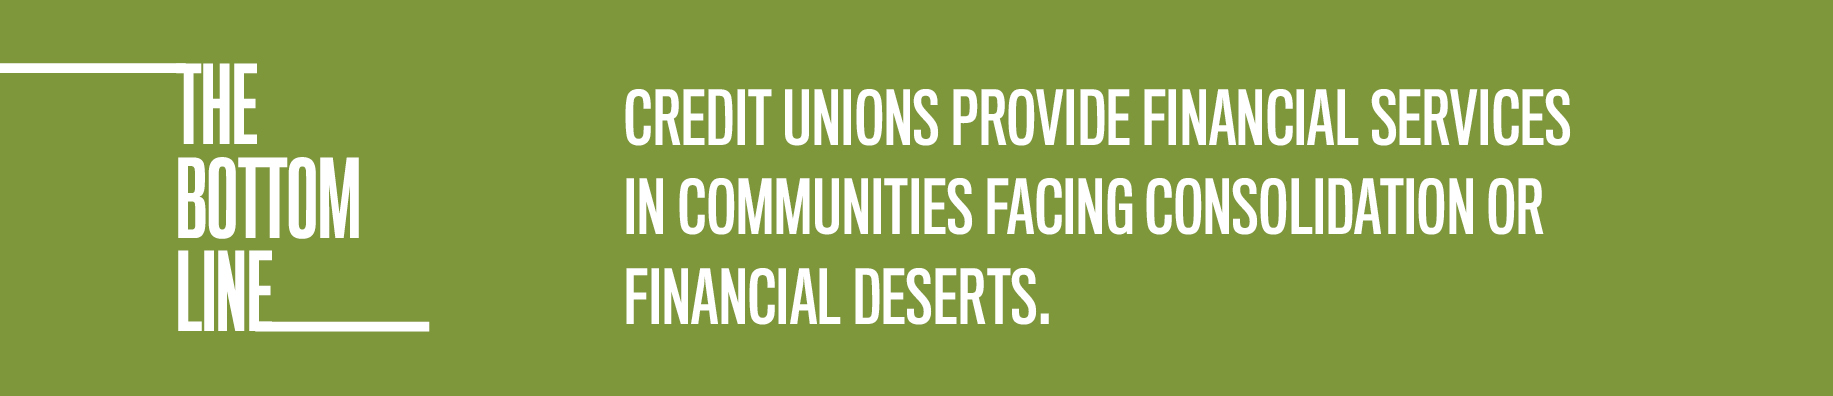 Credit unions provide financial services in communities facing consolidation or financial deserts.